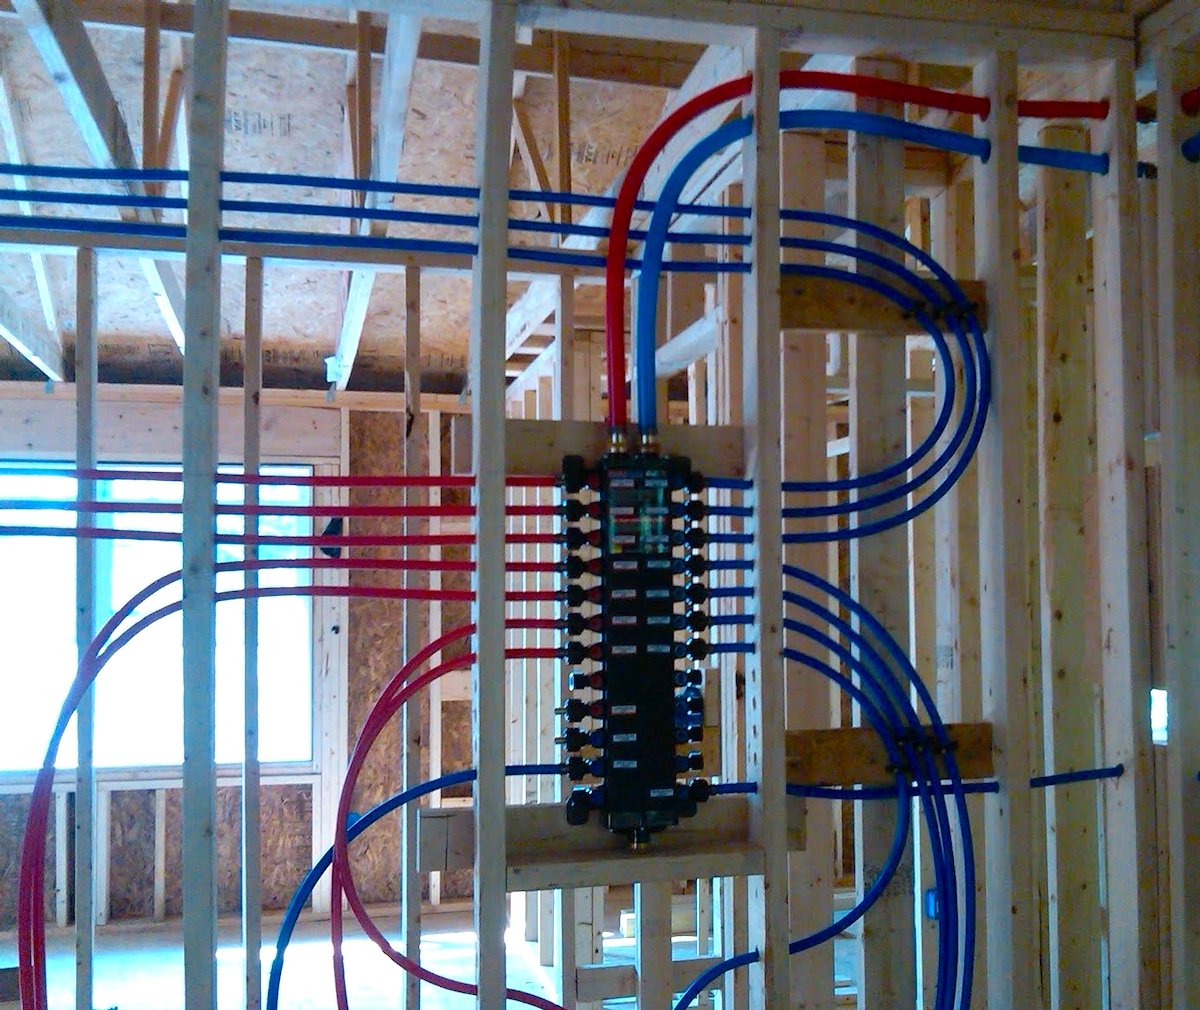 Pex-manifold-residential-water-system